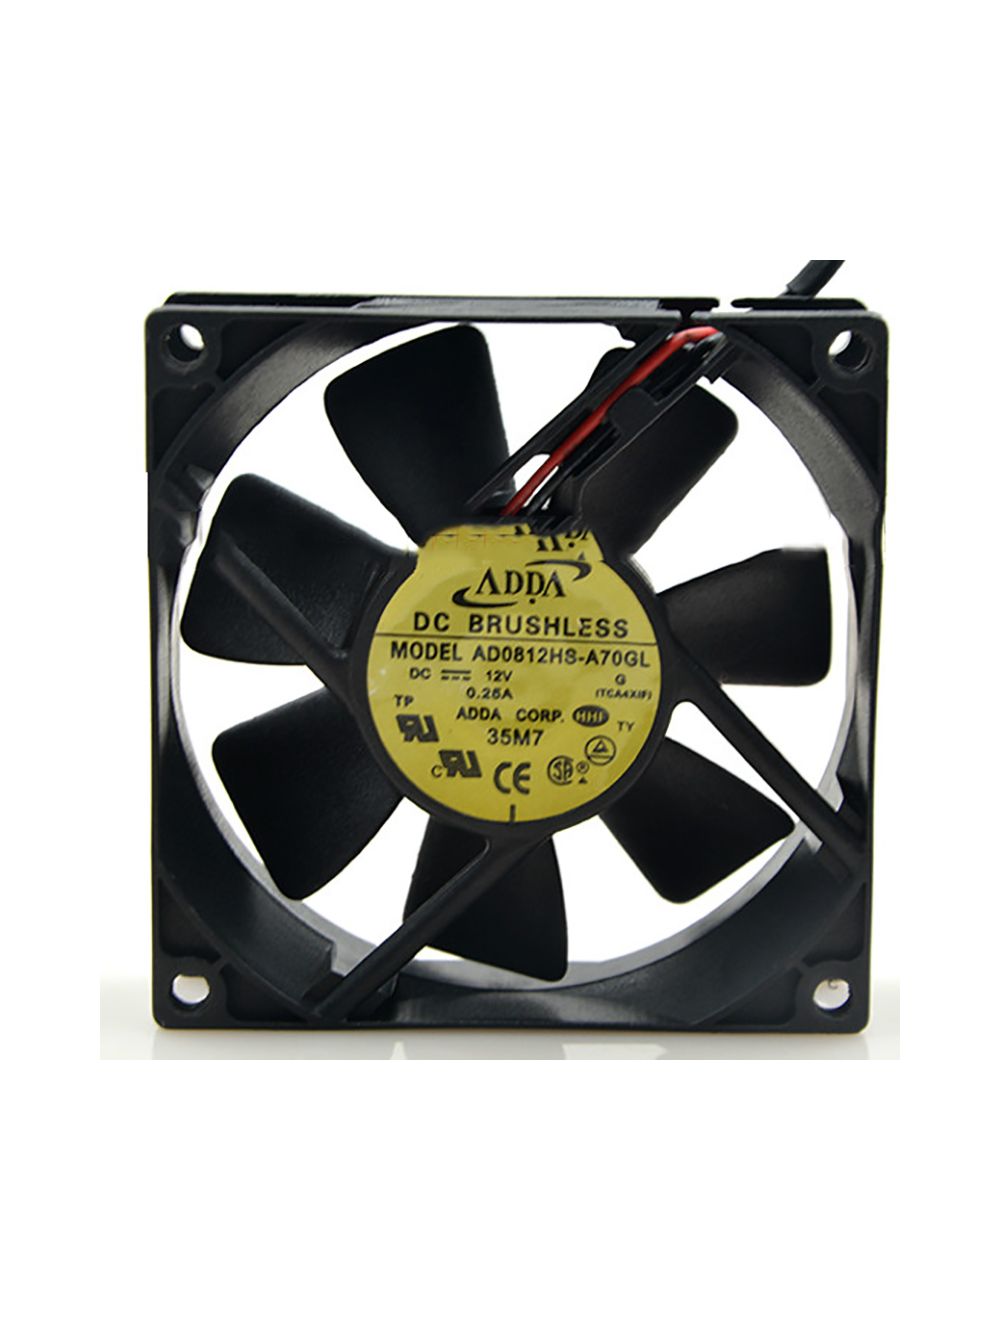 New In stock for sale, ADDA Fan AD0812HS-A70GL